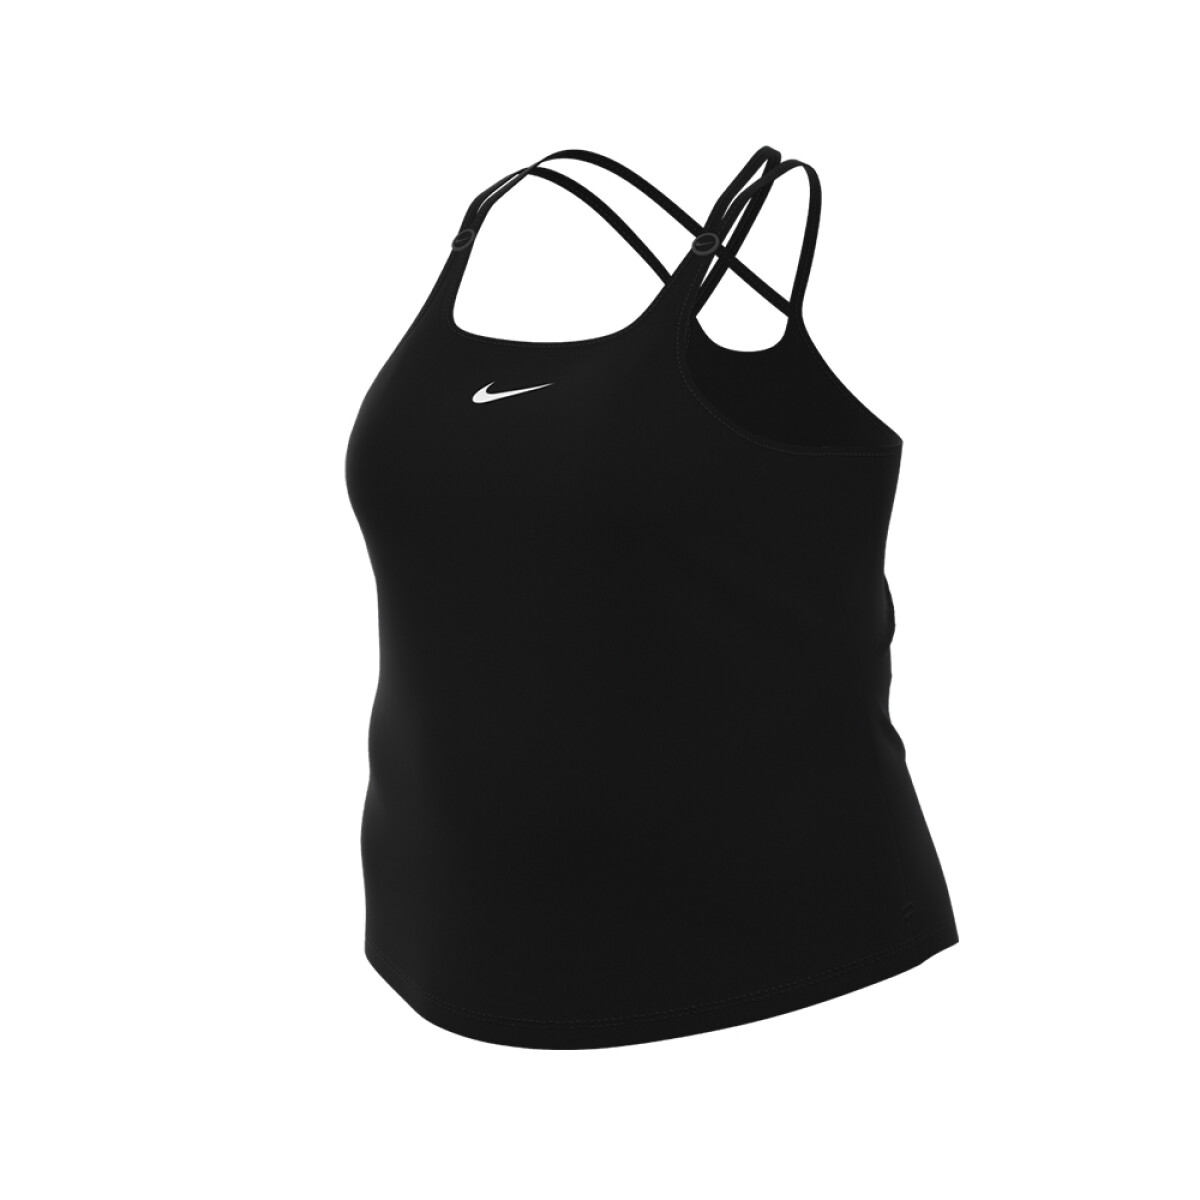 MUSCULOSA NIKE ONE LUXE - Black 